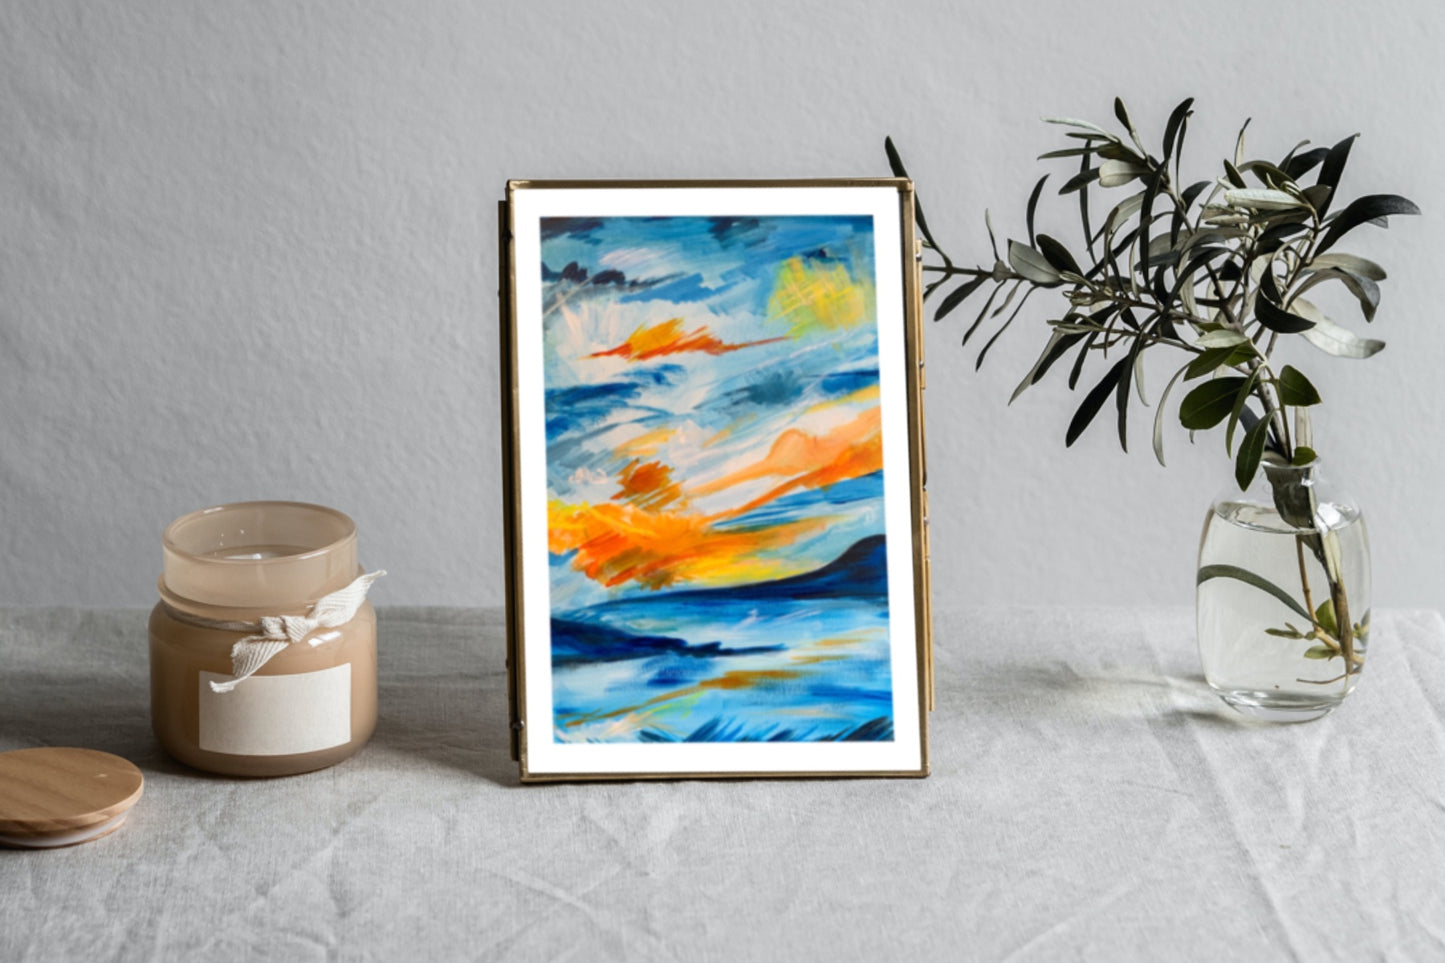 Blue Abstracted Skyscape 2 - Art Print